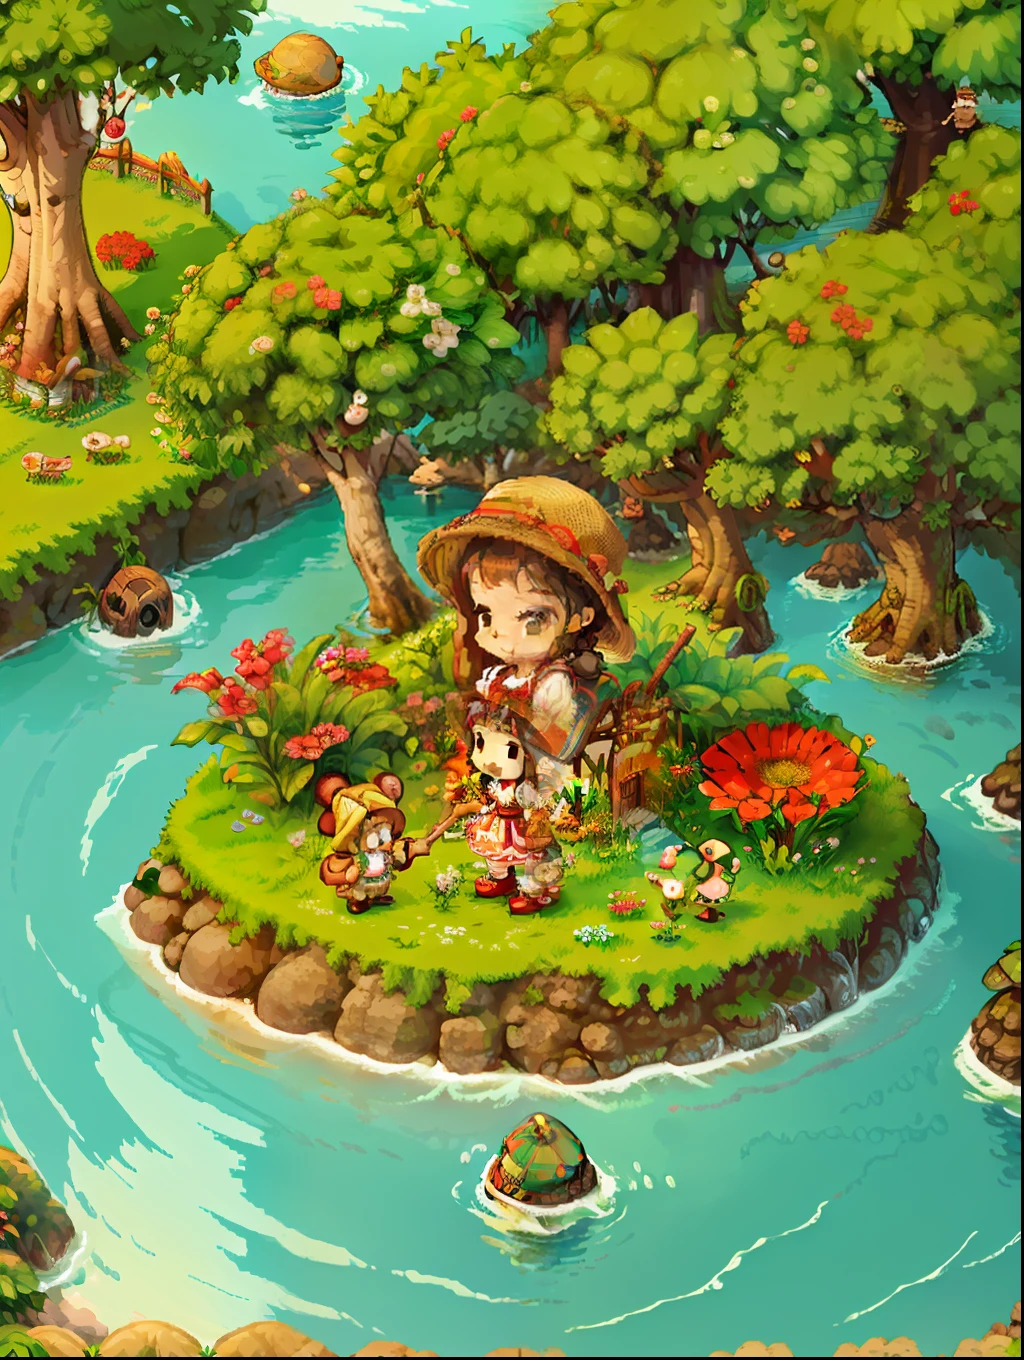 （Pixel art：1.4），Q version of the ，teddy bears，Straw Hat Hat，basket，Floral dress，Little red leather shoes，The tree，river water，Flowerushroom hut